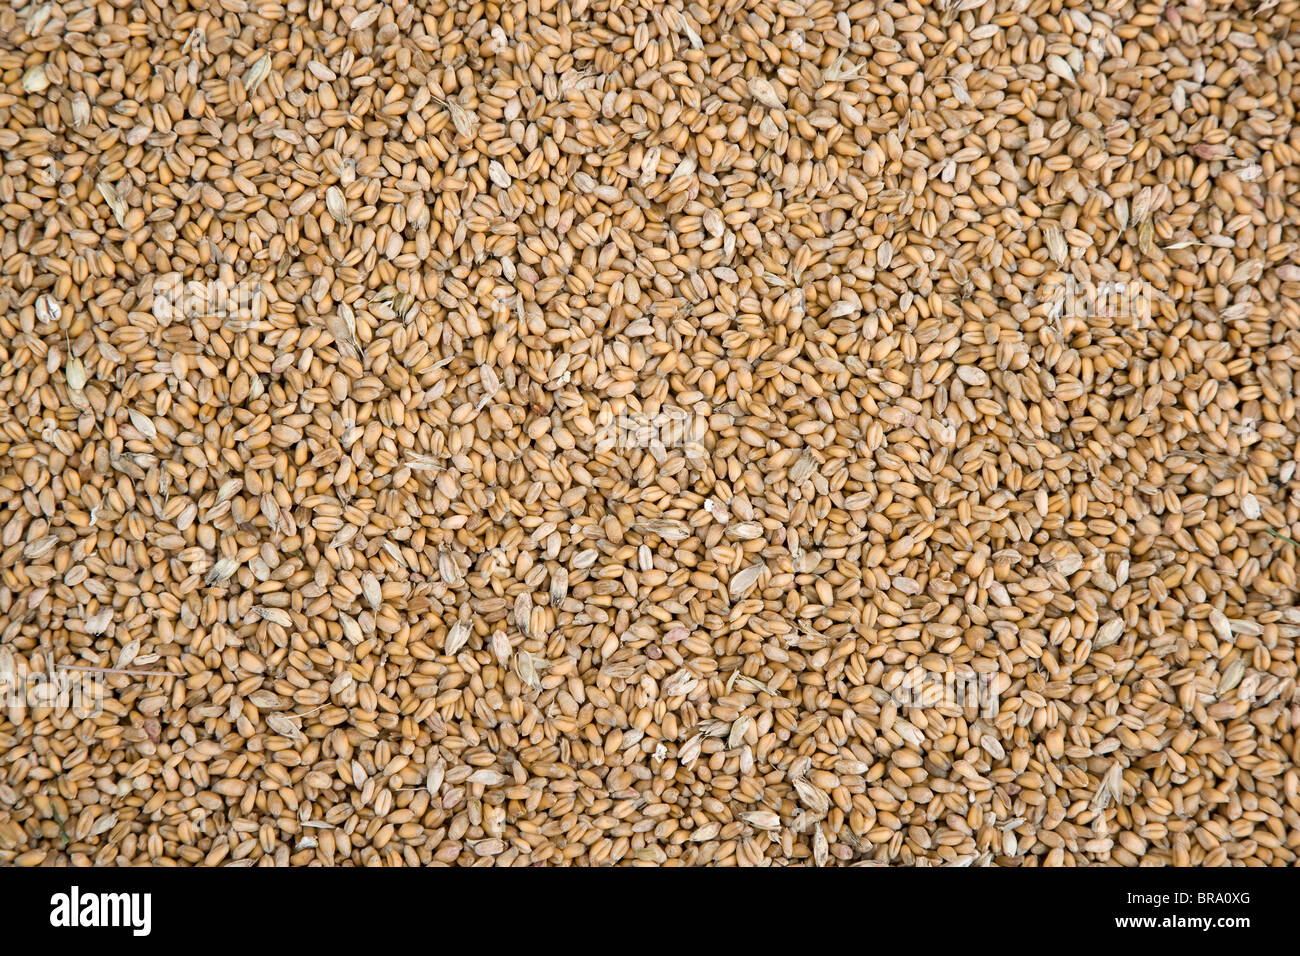 Wheat grain seeds of Triticum species of grasses before milling for flour bran and wheatgerm Stock Photo